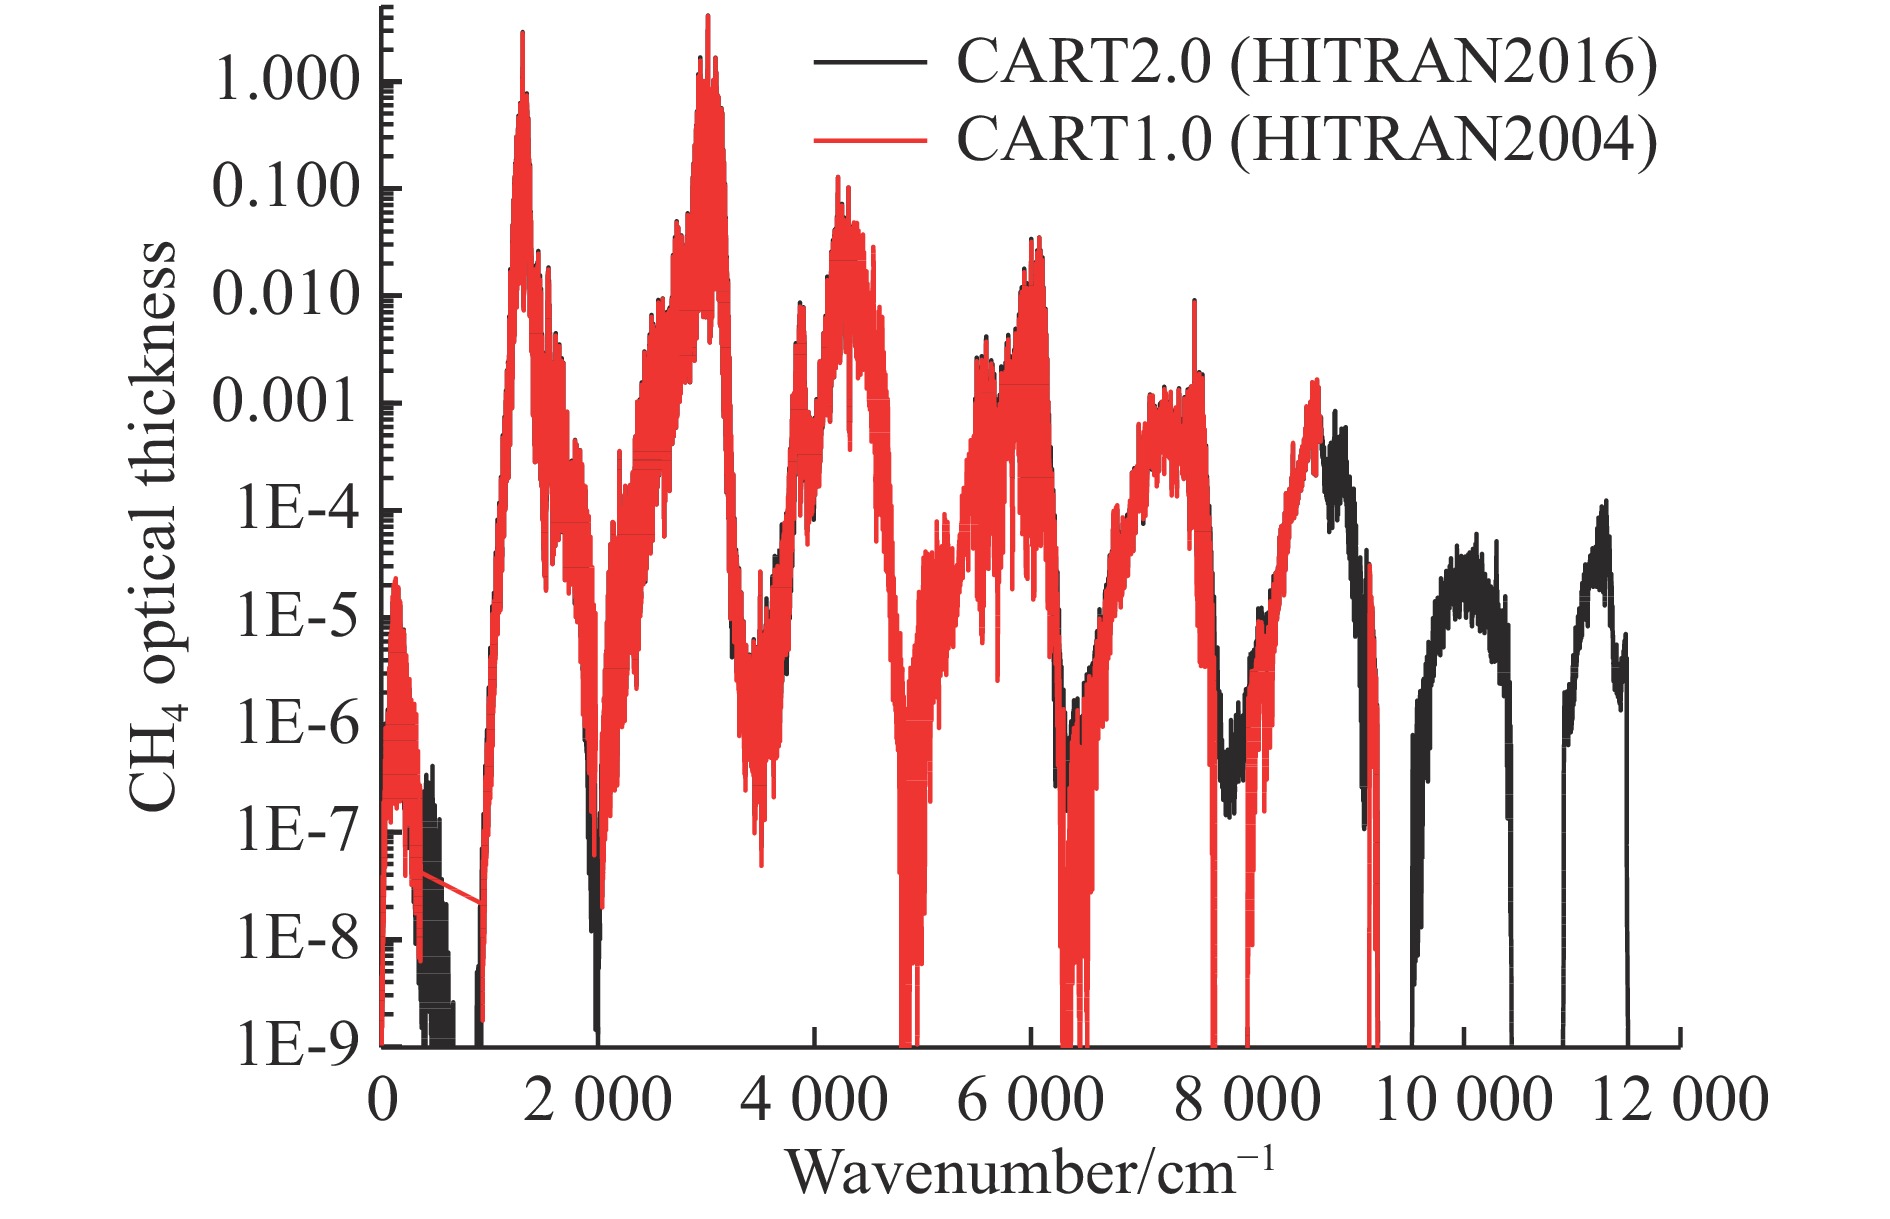 Horizontal optical depth of CH4 calculated by CART1.0 and CART2.0